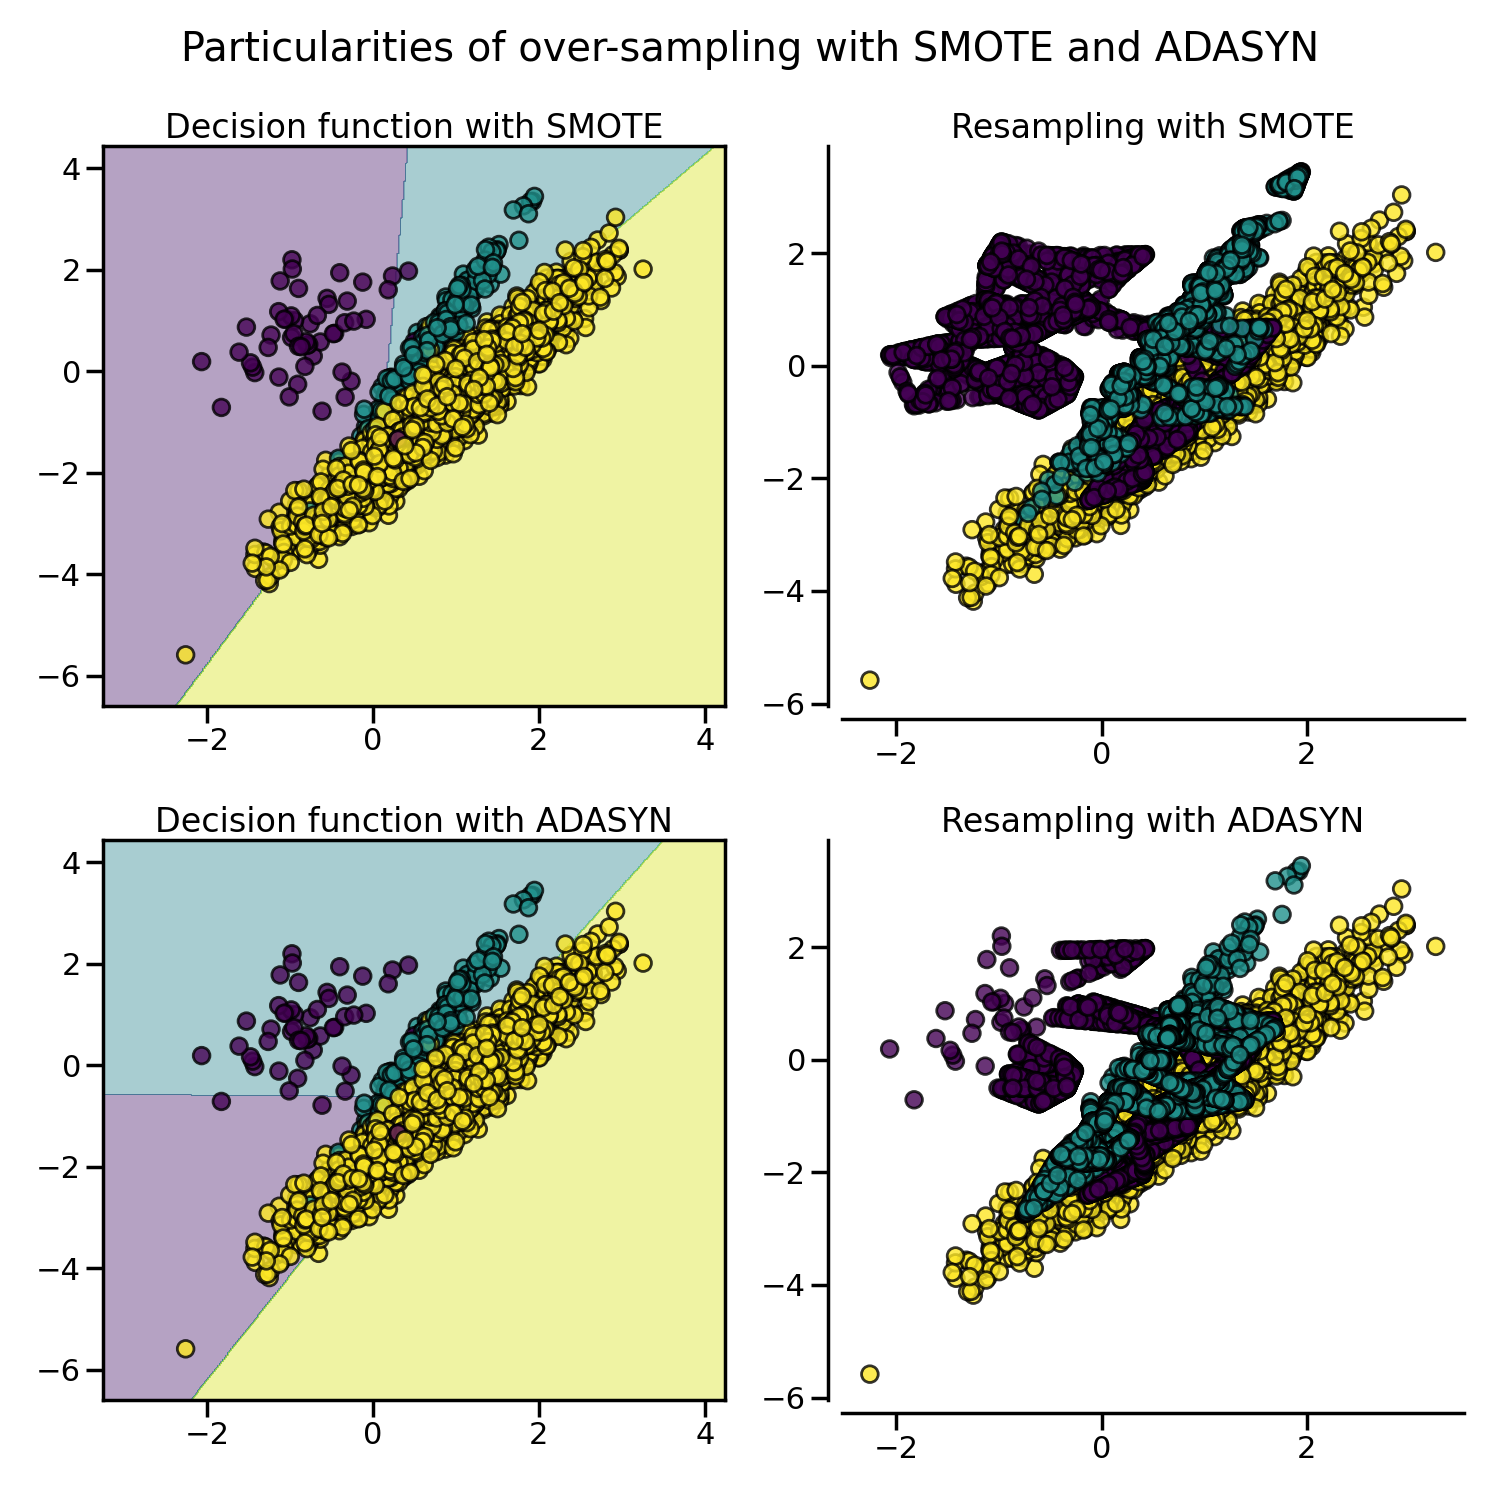 Particularities of over-sampling with SMOTE and ADASYN, Decision function with SMOTE, Resampling with SMOTE, Decision function with ADASYN, Resampling with ADASYN